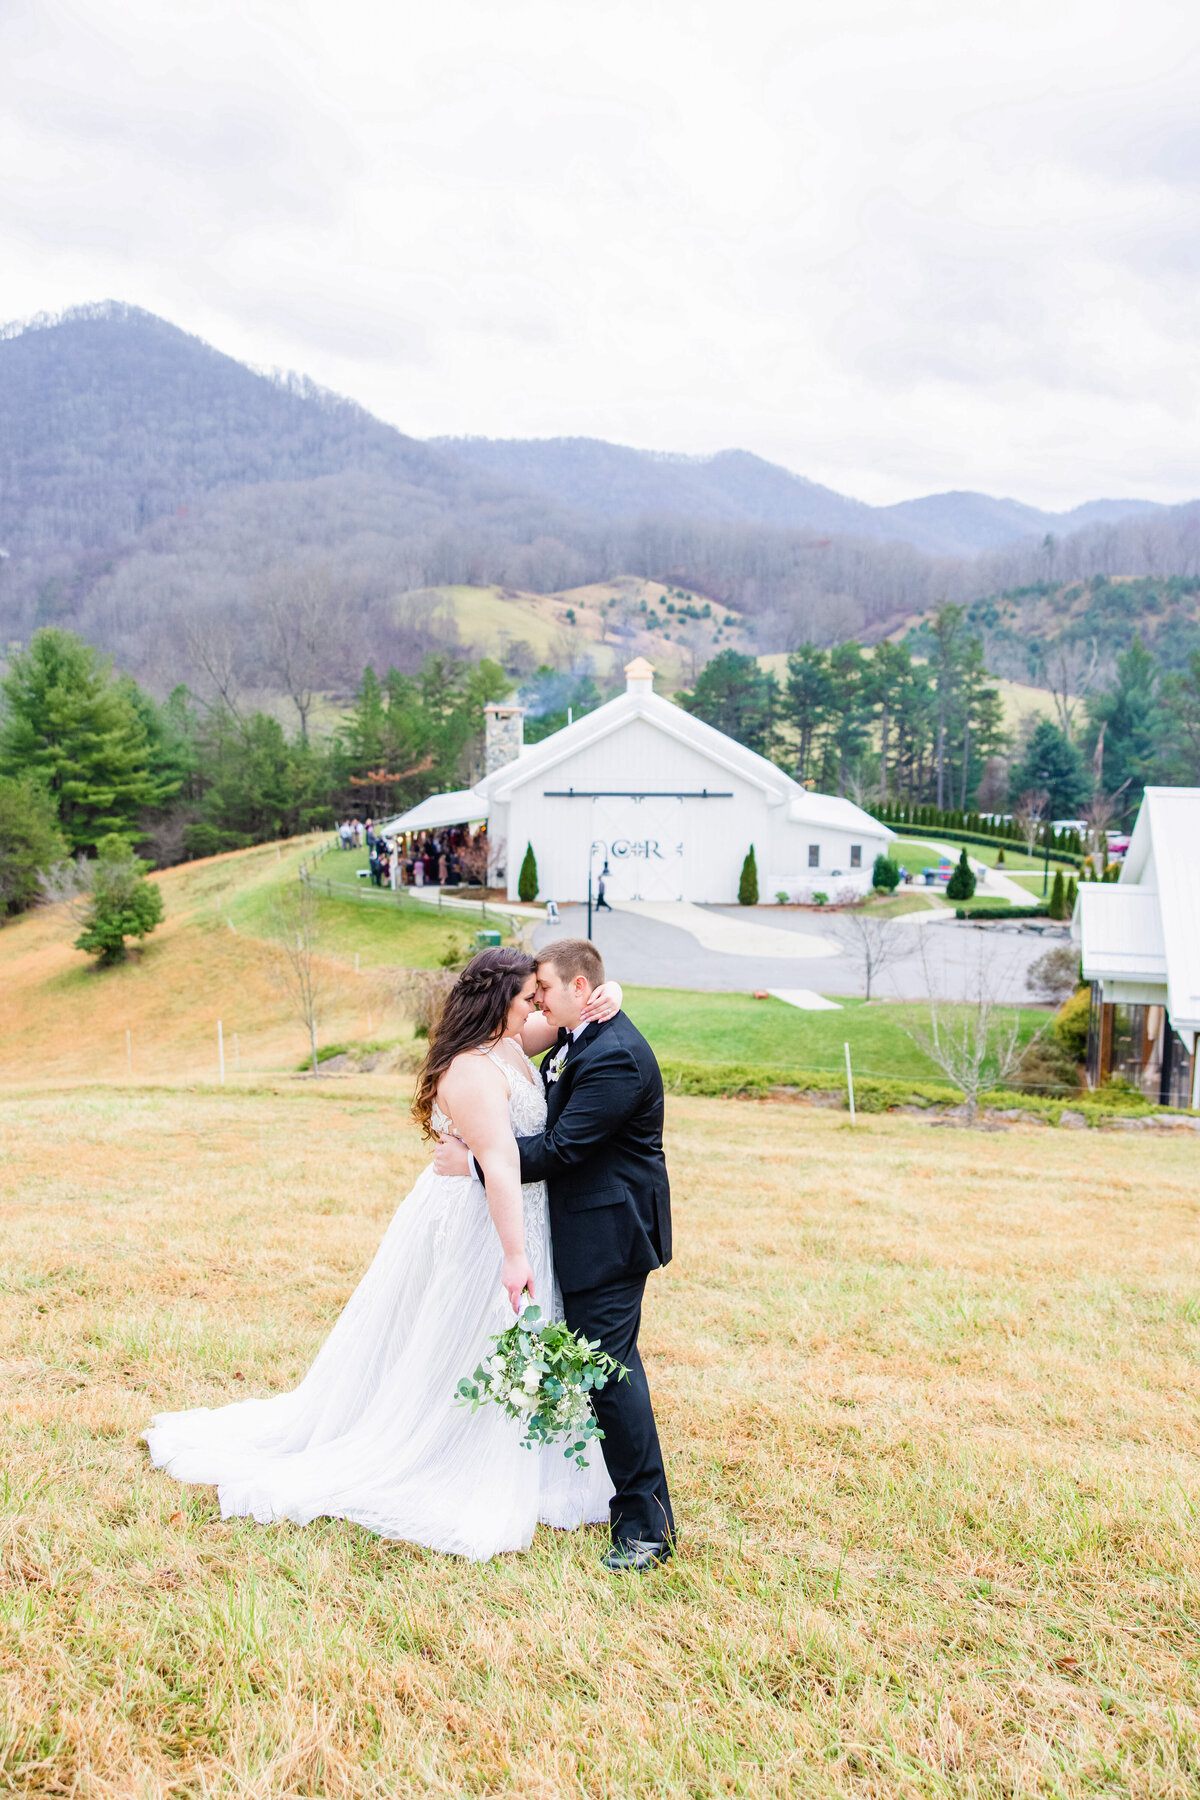 bride and groom forehead to forehead on wedding day with barn in the background